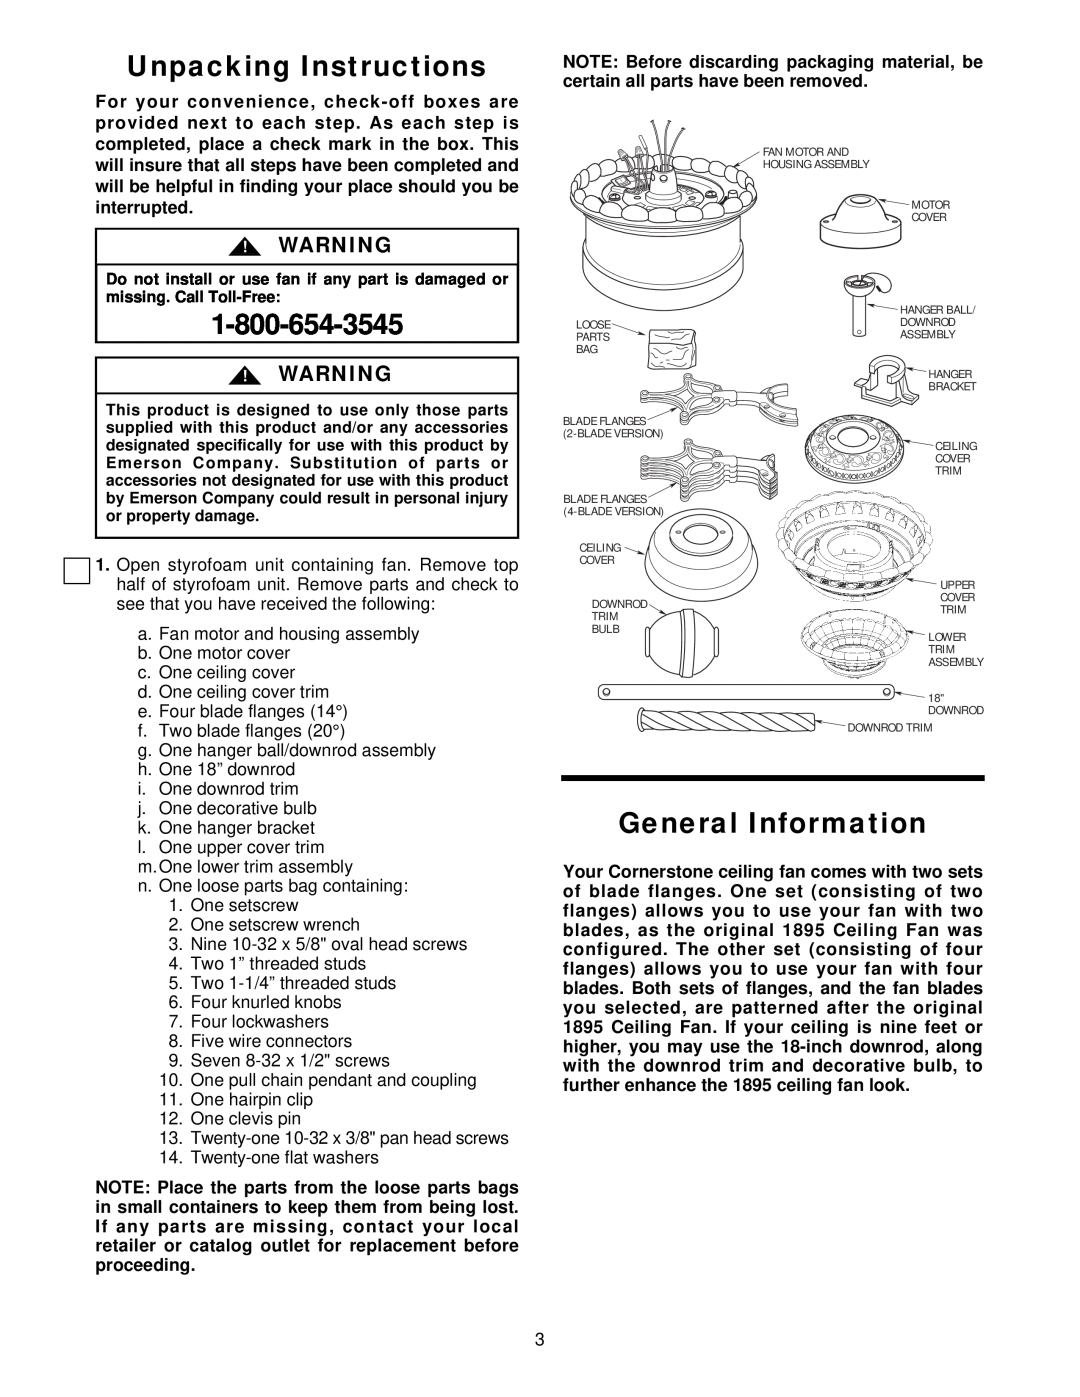 Emerson CF1WB01, CF1AB01, CF1PW01 owner manual Unpacking Instructions, General Information 